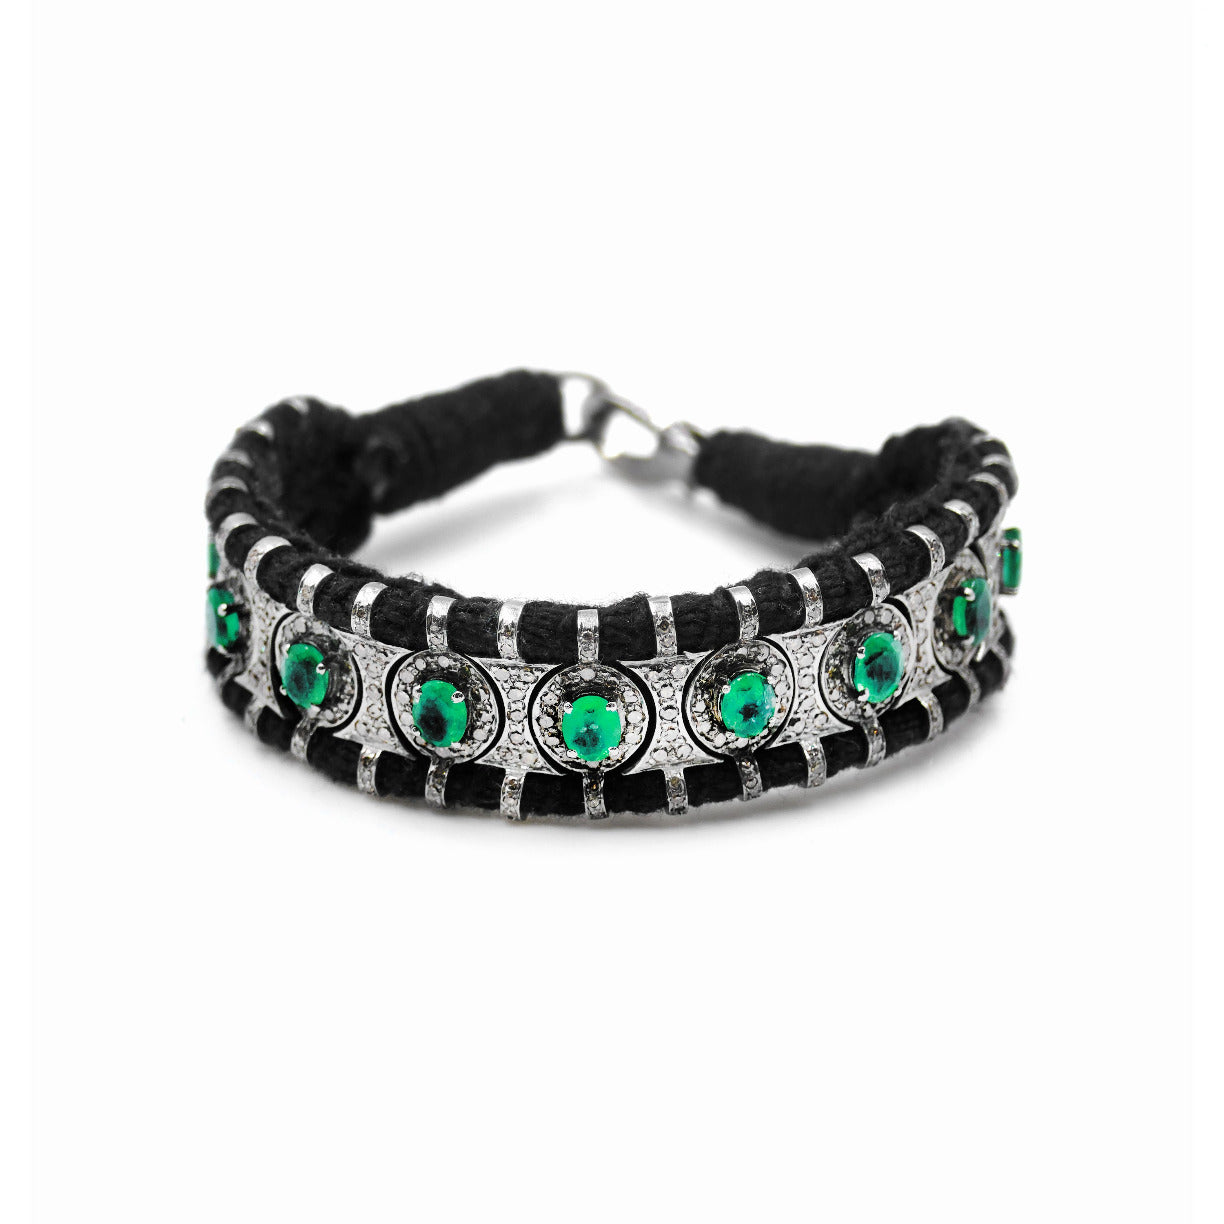 Sao Paulo Black and Emeralds bracelet in 925 silver and diamonds